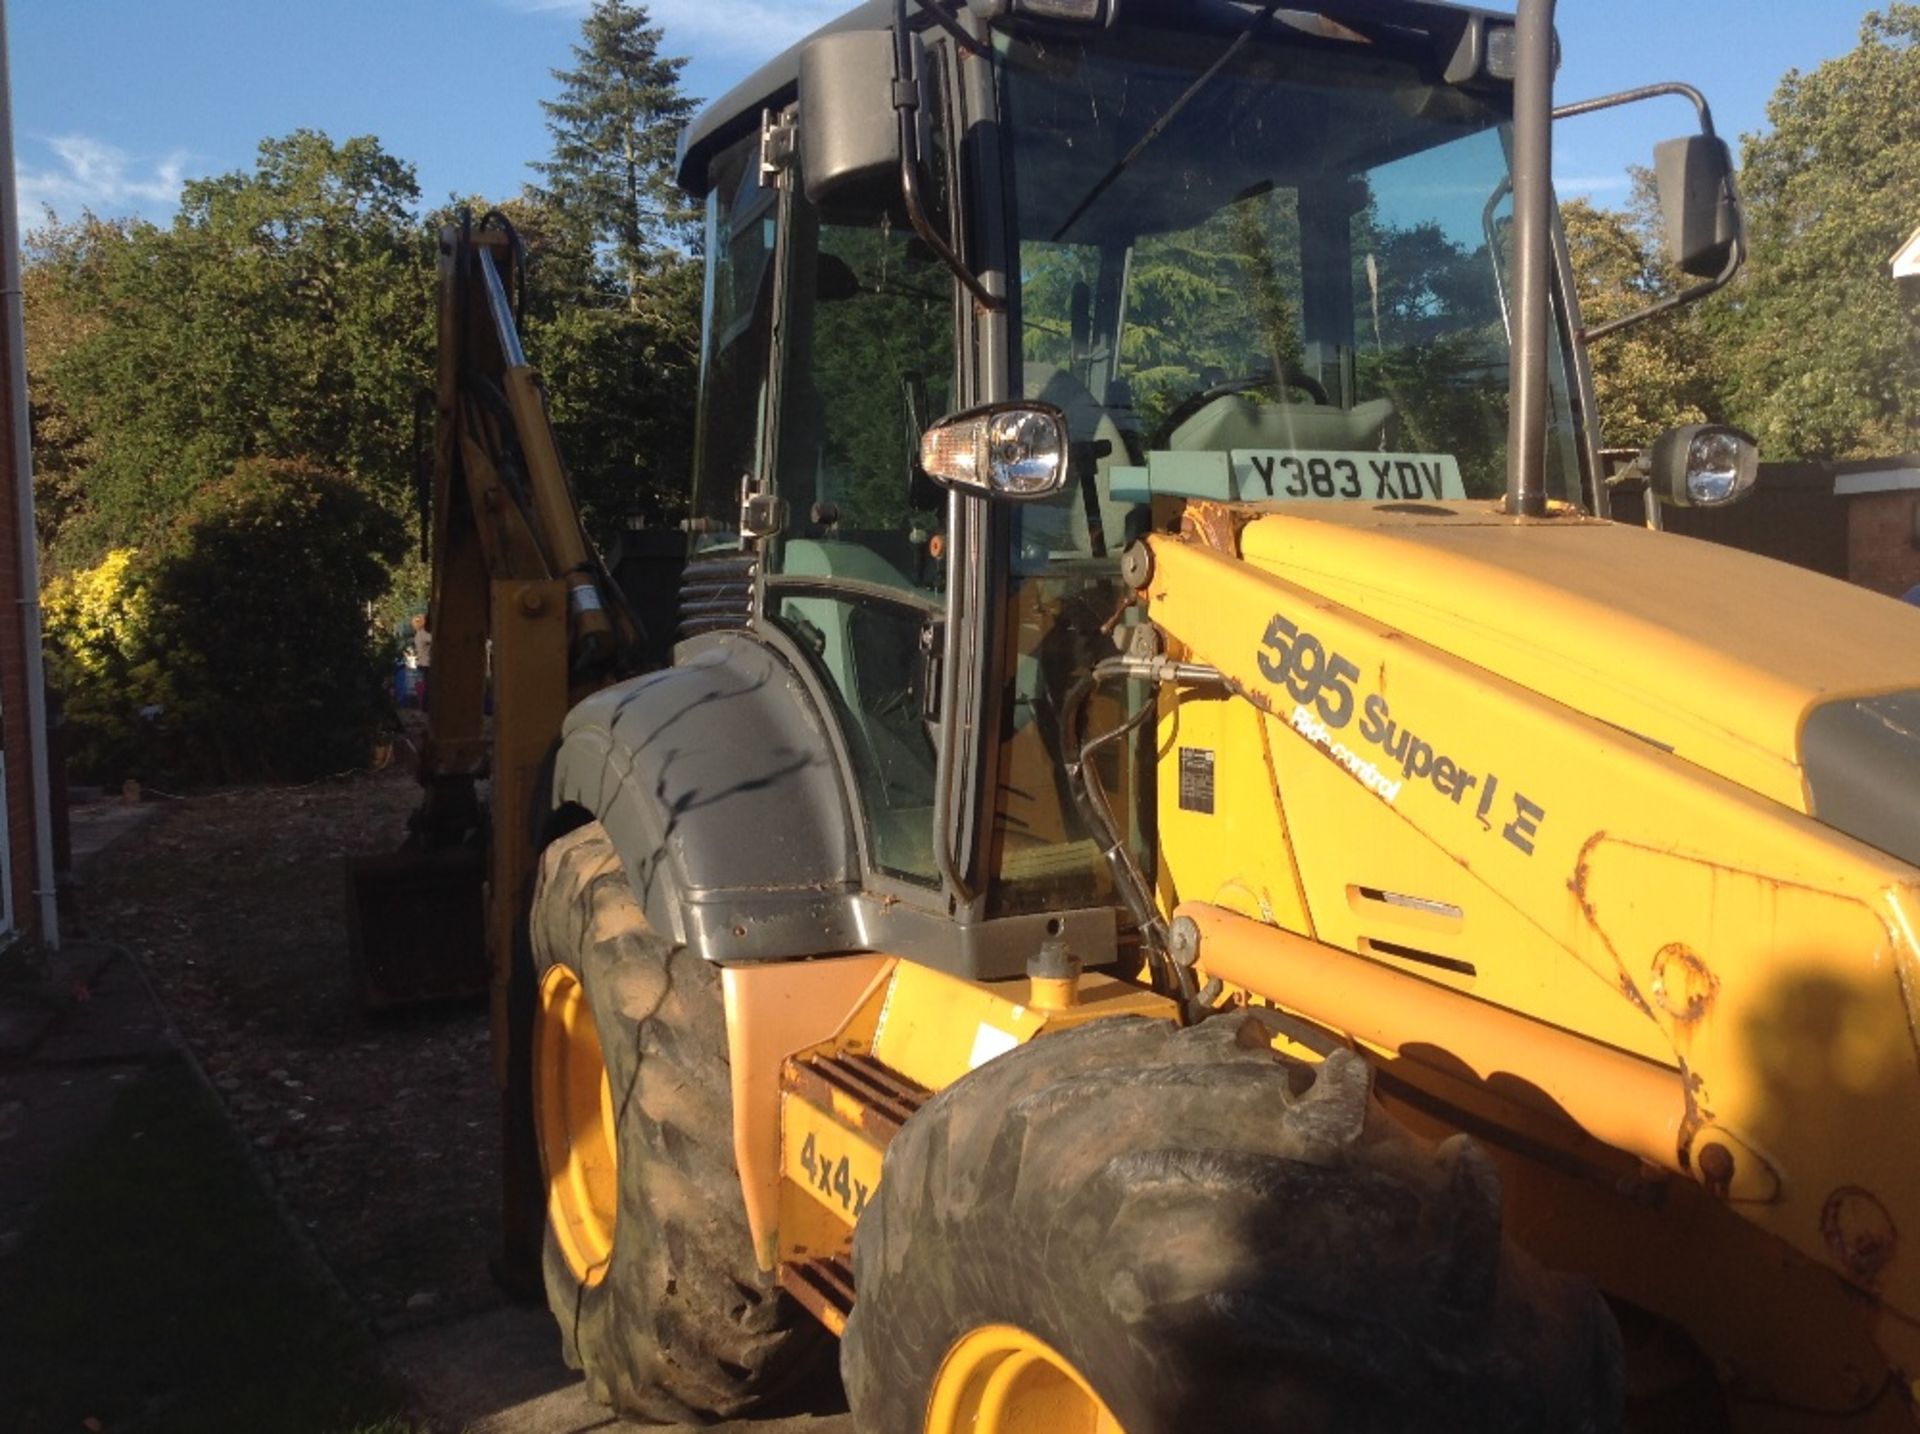 Case 595SLE Backhoe Loader, 4 in 1 front bucket with forks, telescopic rear dipper with 3 buckets, - Image 3 of 4